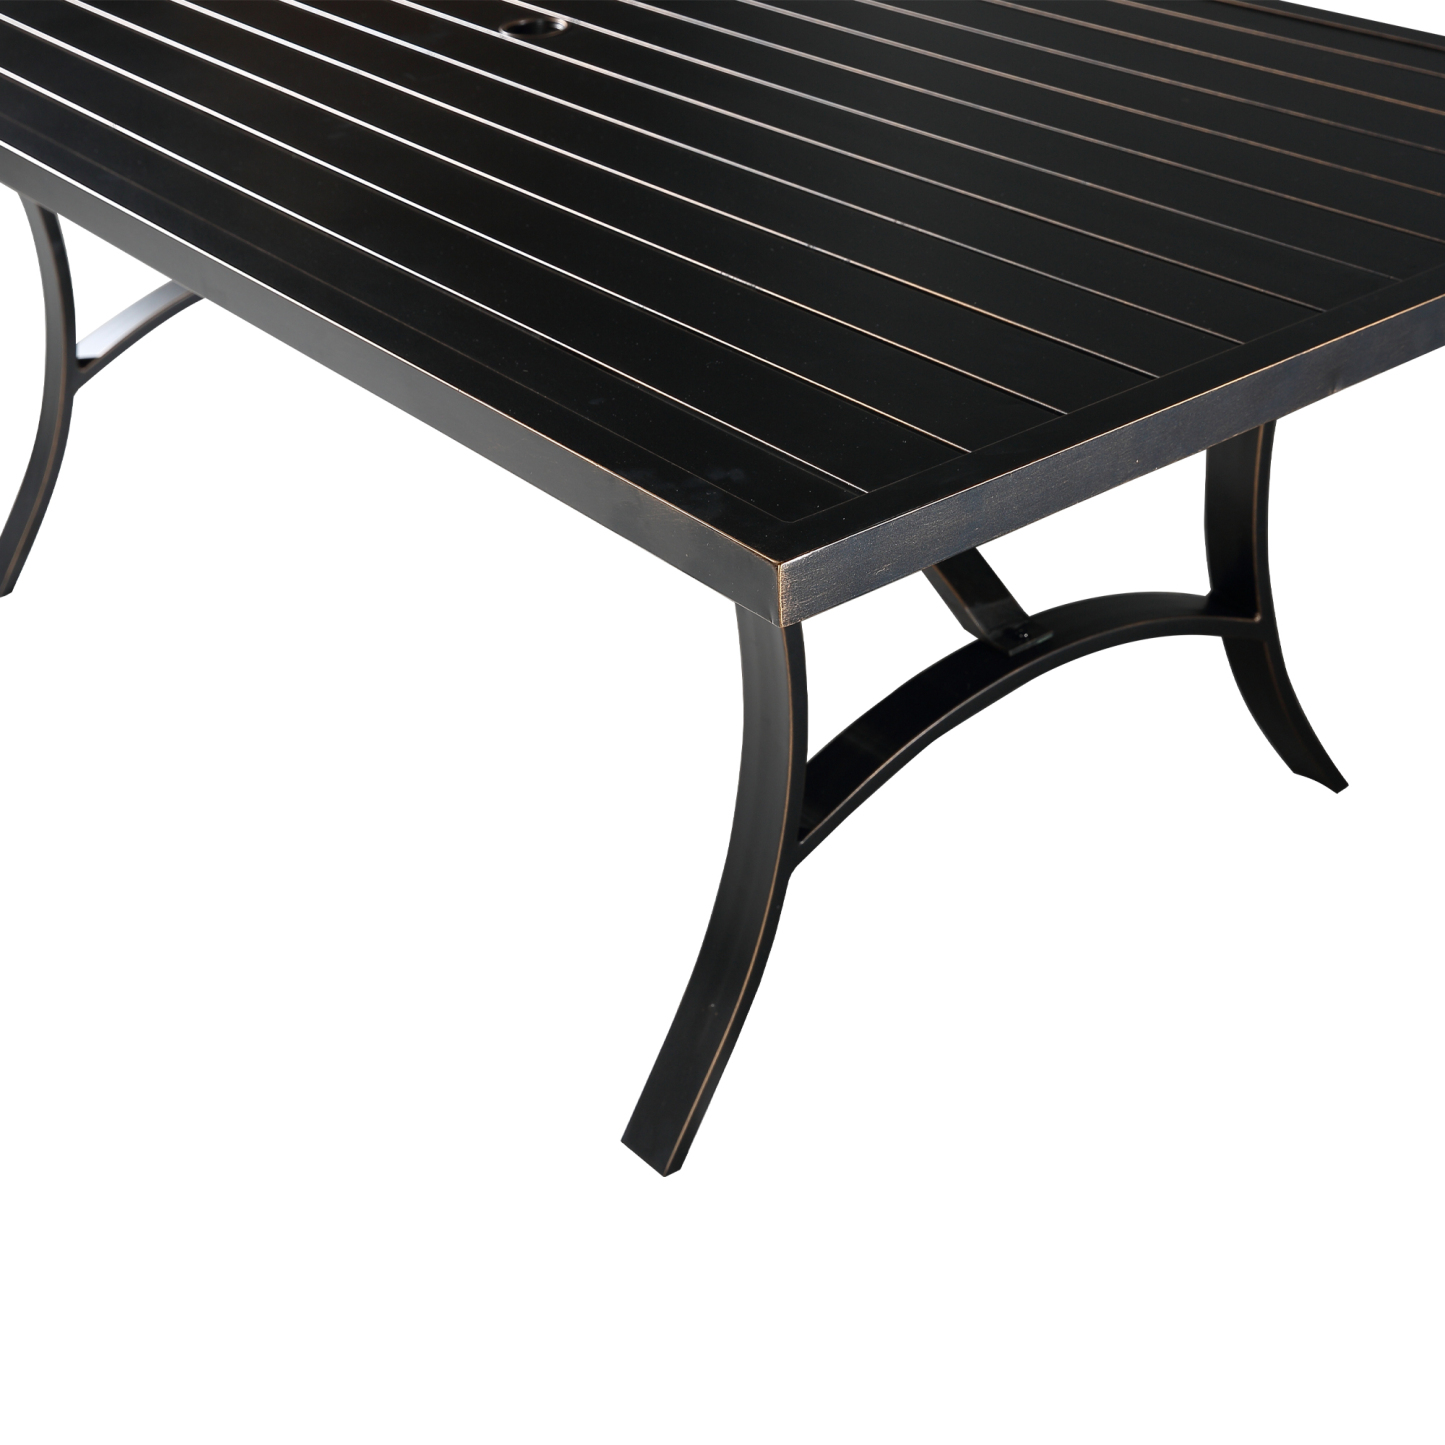 Mondawe Black Rectangle Patio Aluminum Outdoor Dining Table Accent Side Table with Umbrella Hole-Mondawe